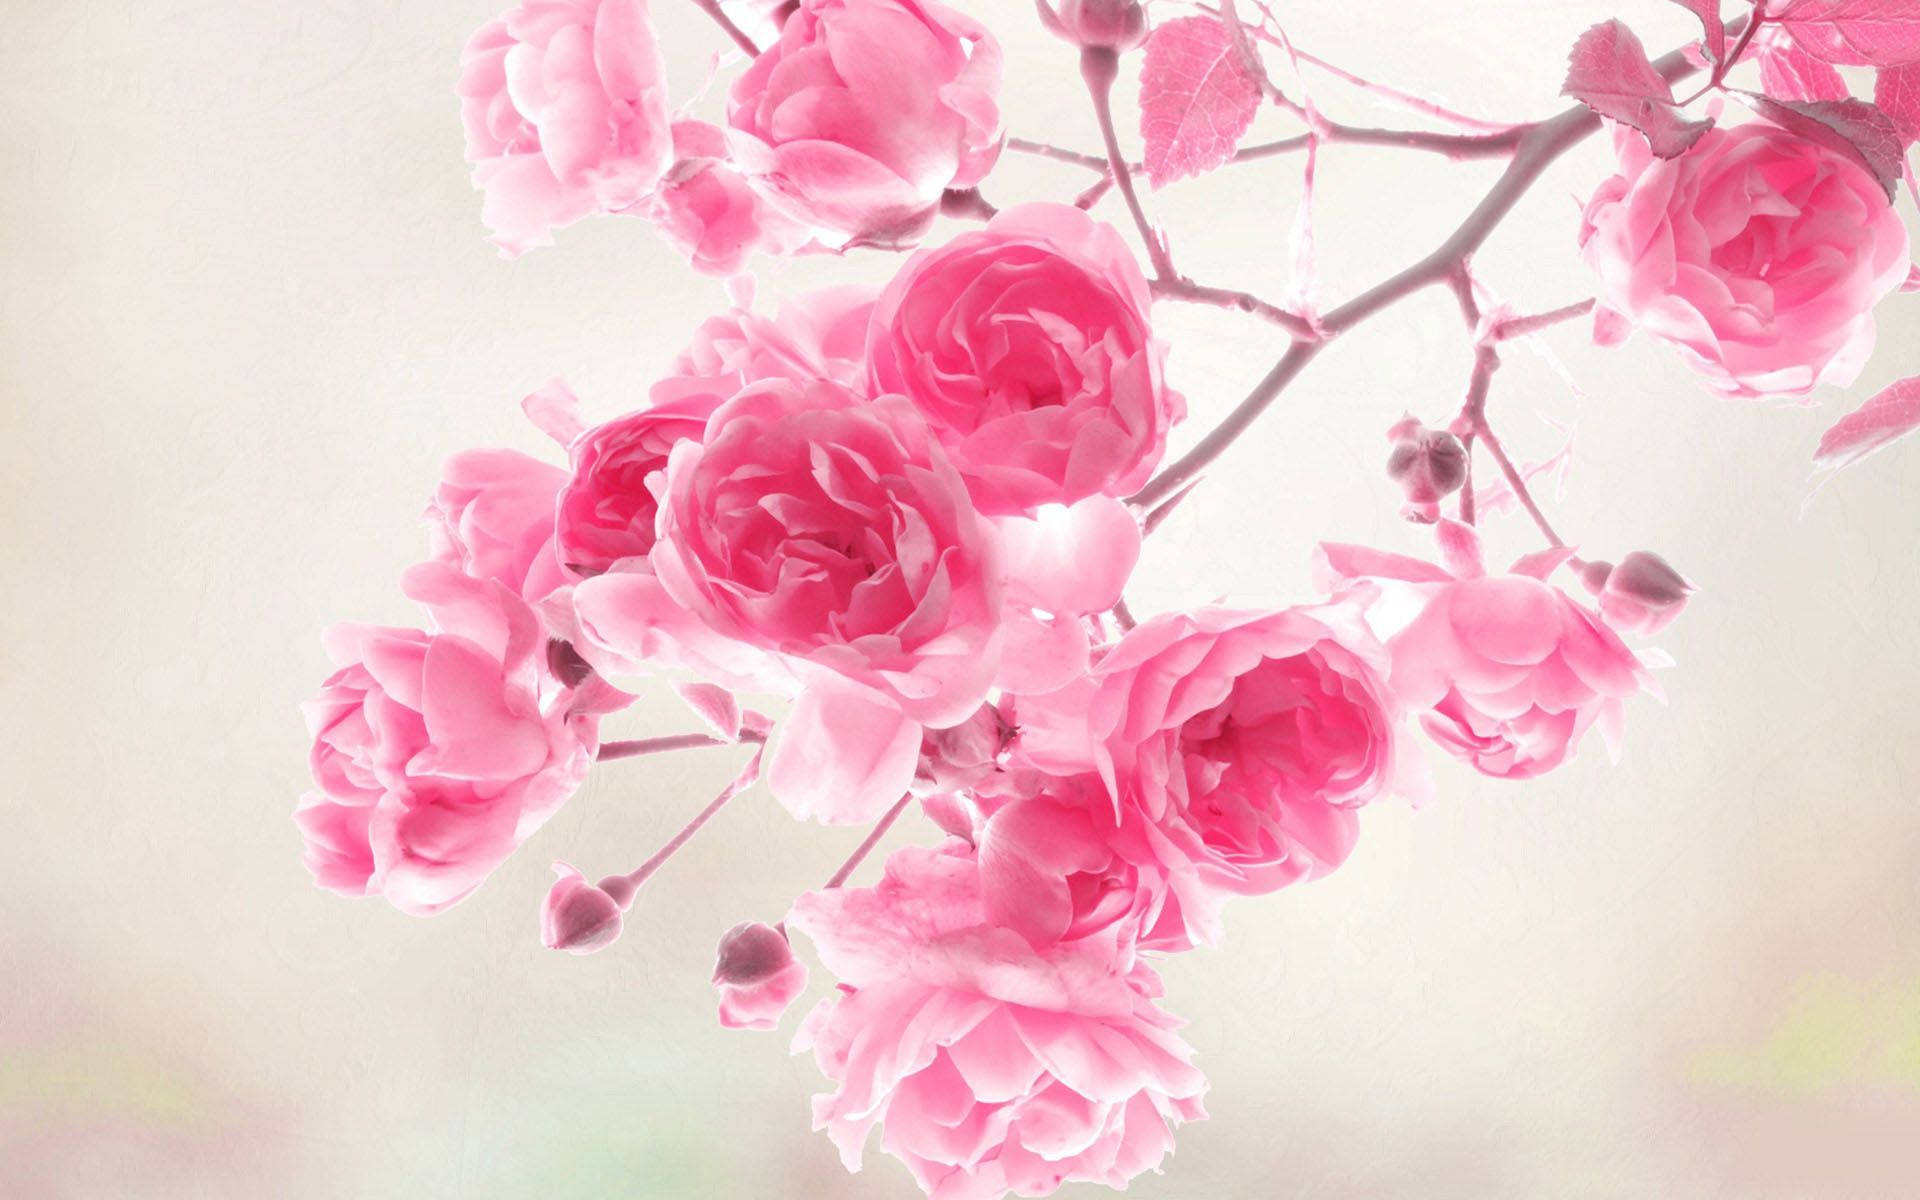 Fresh pink petals gently unfold to reveal a vibrant floral beauty Wallpaper